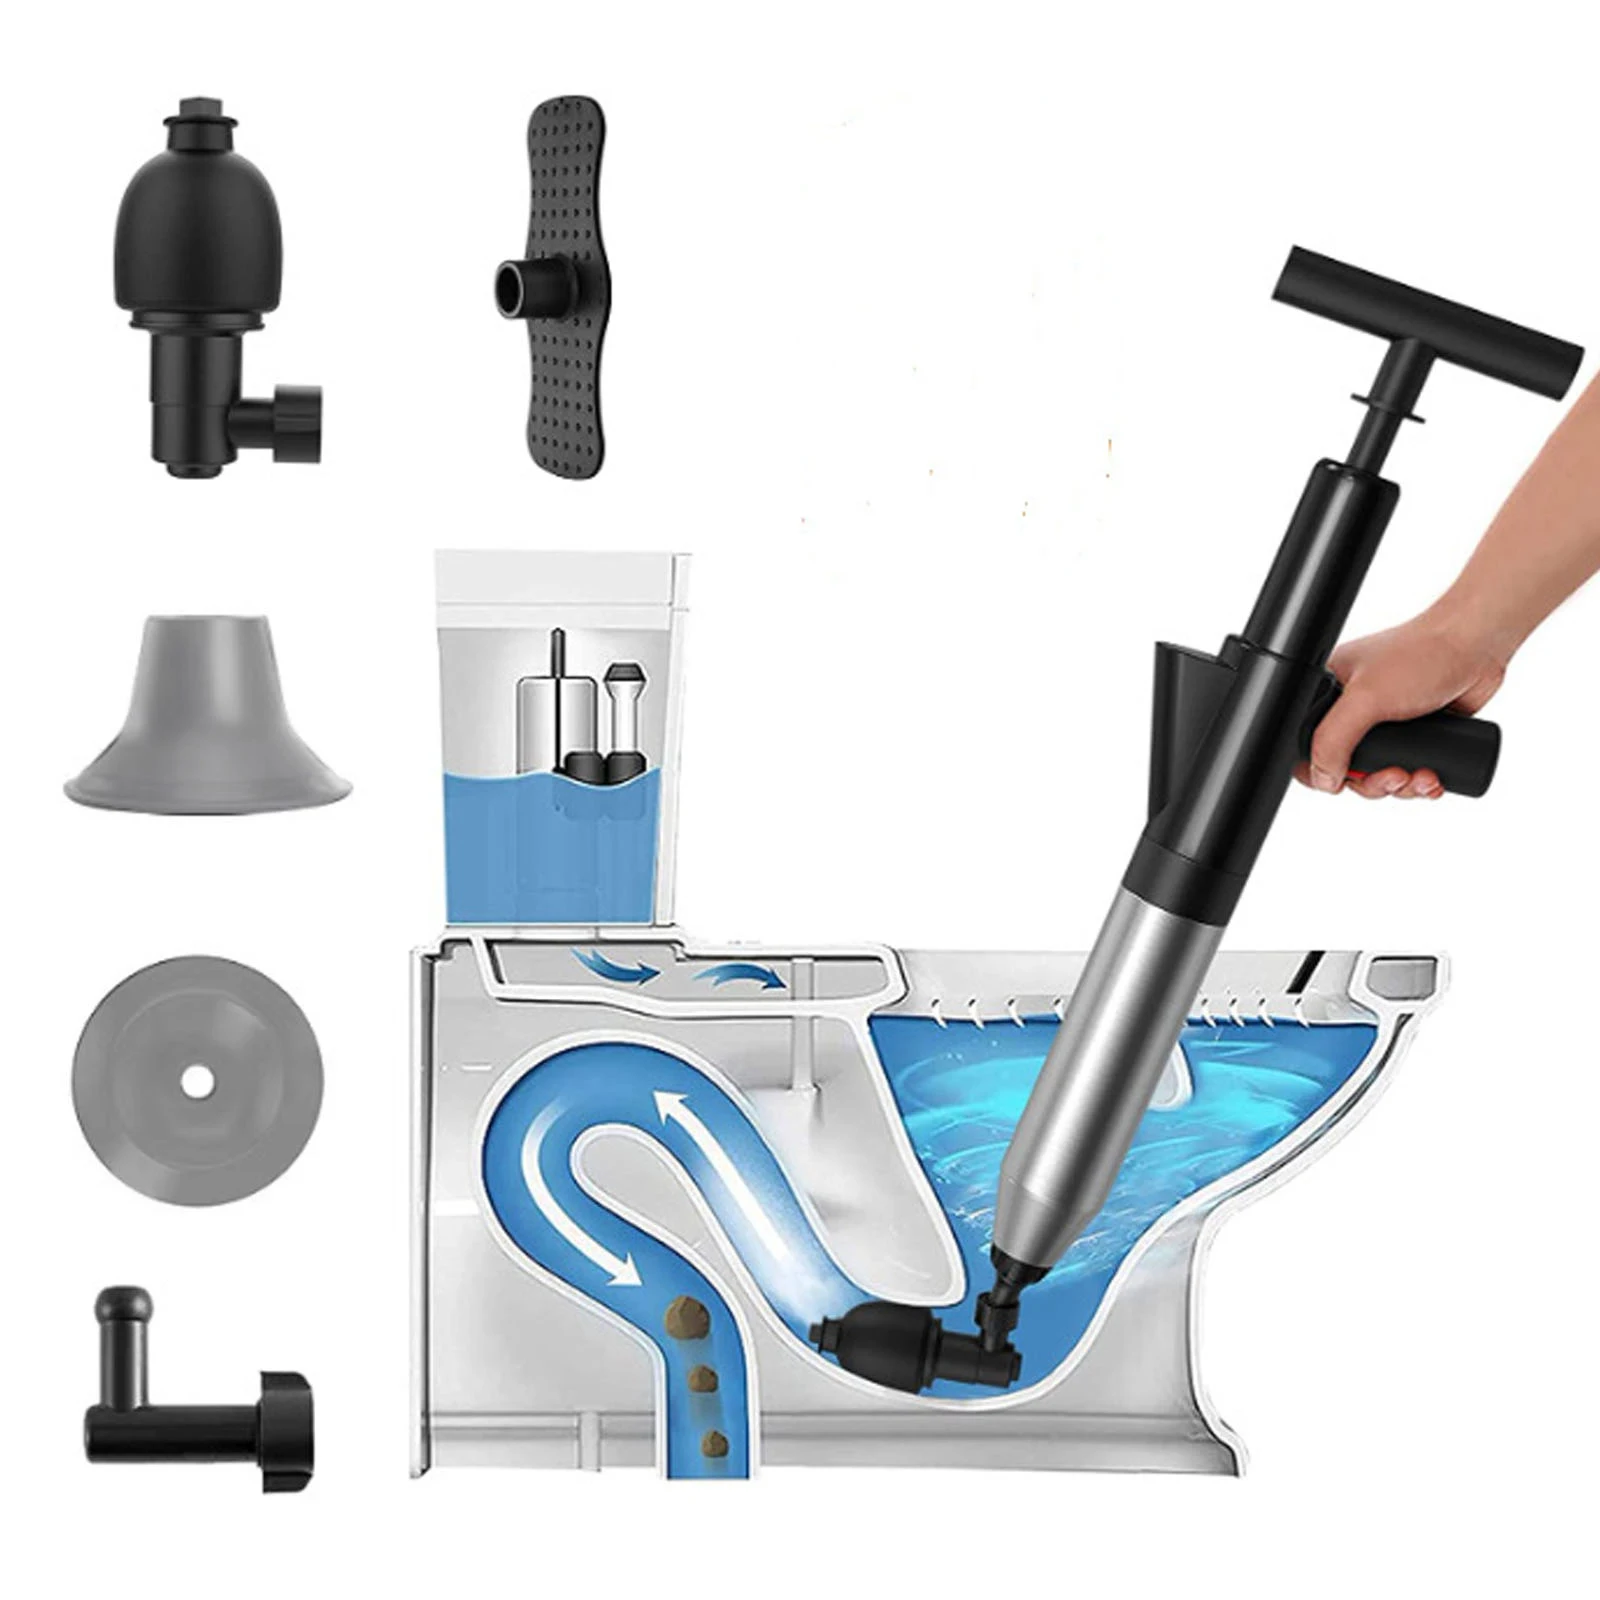 

Sewer Pipe Unblocker Air Drain Blaster Dredge Clog Remover High Pressure Drain Plunger Toilet Plunger Bathroom Products